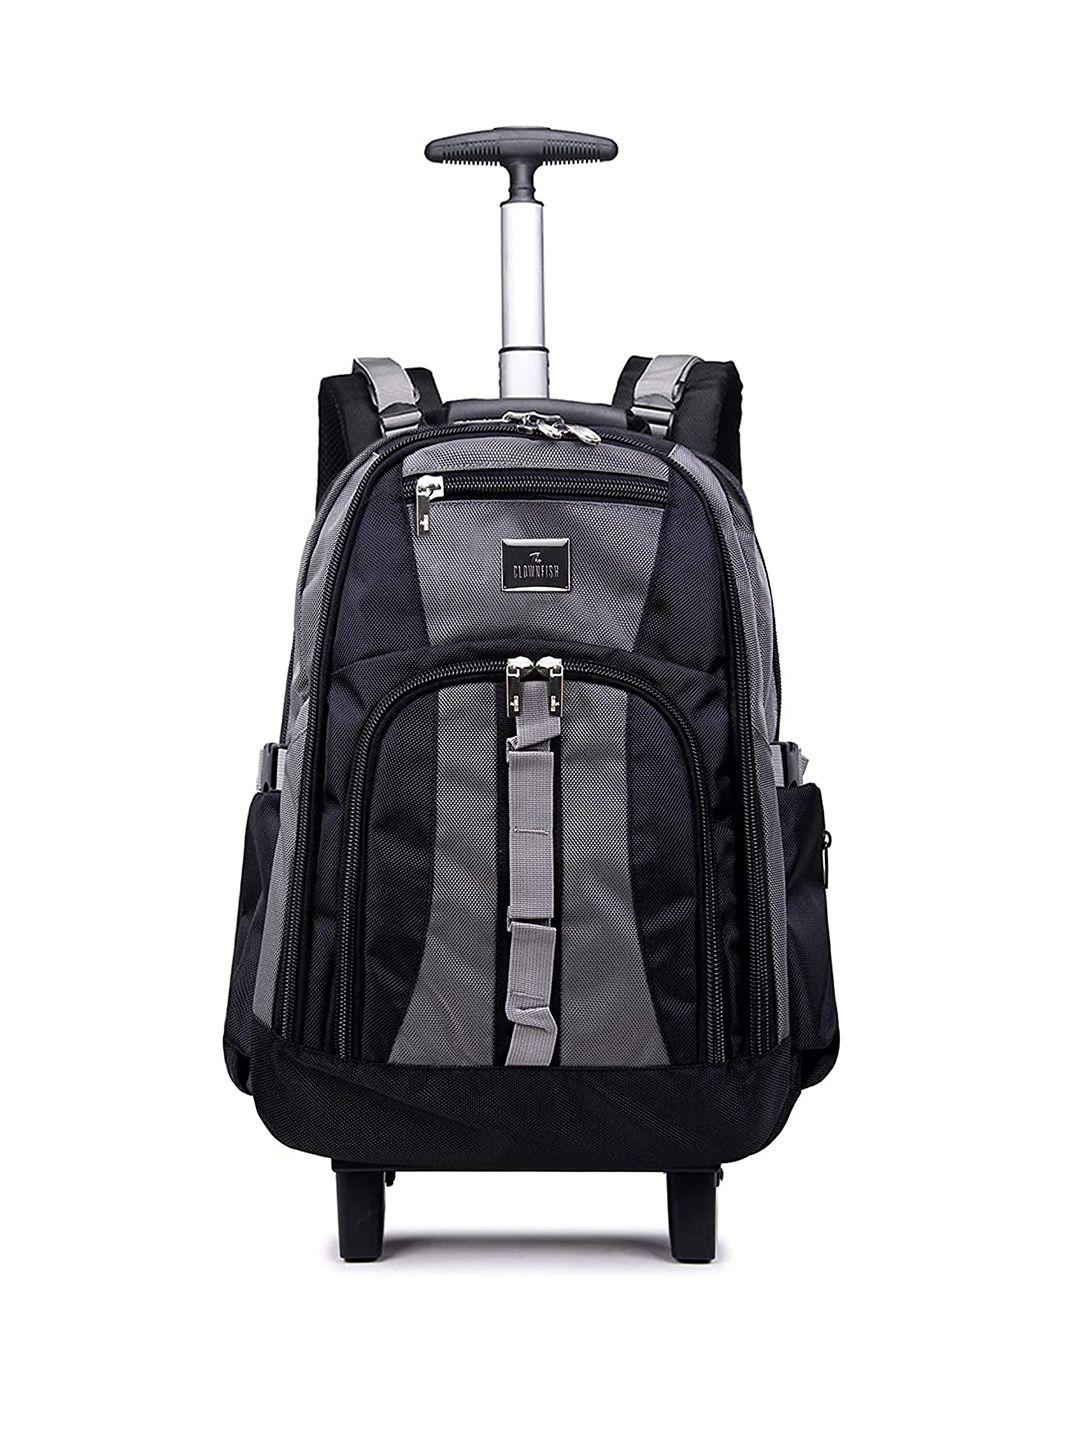 the clownfish water resistant two wheel laptop trolley backpack with compression straps